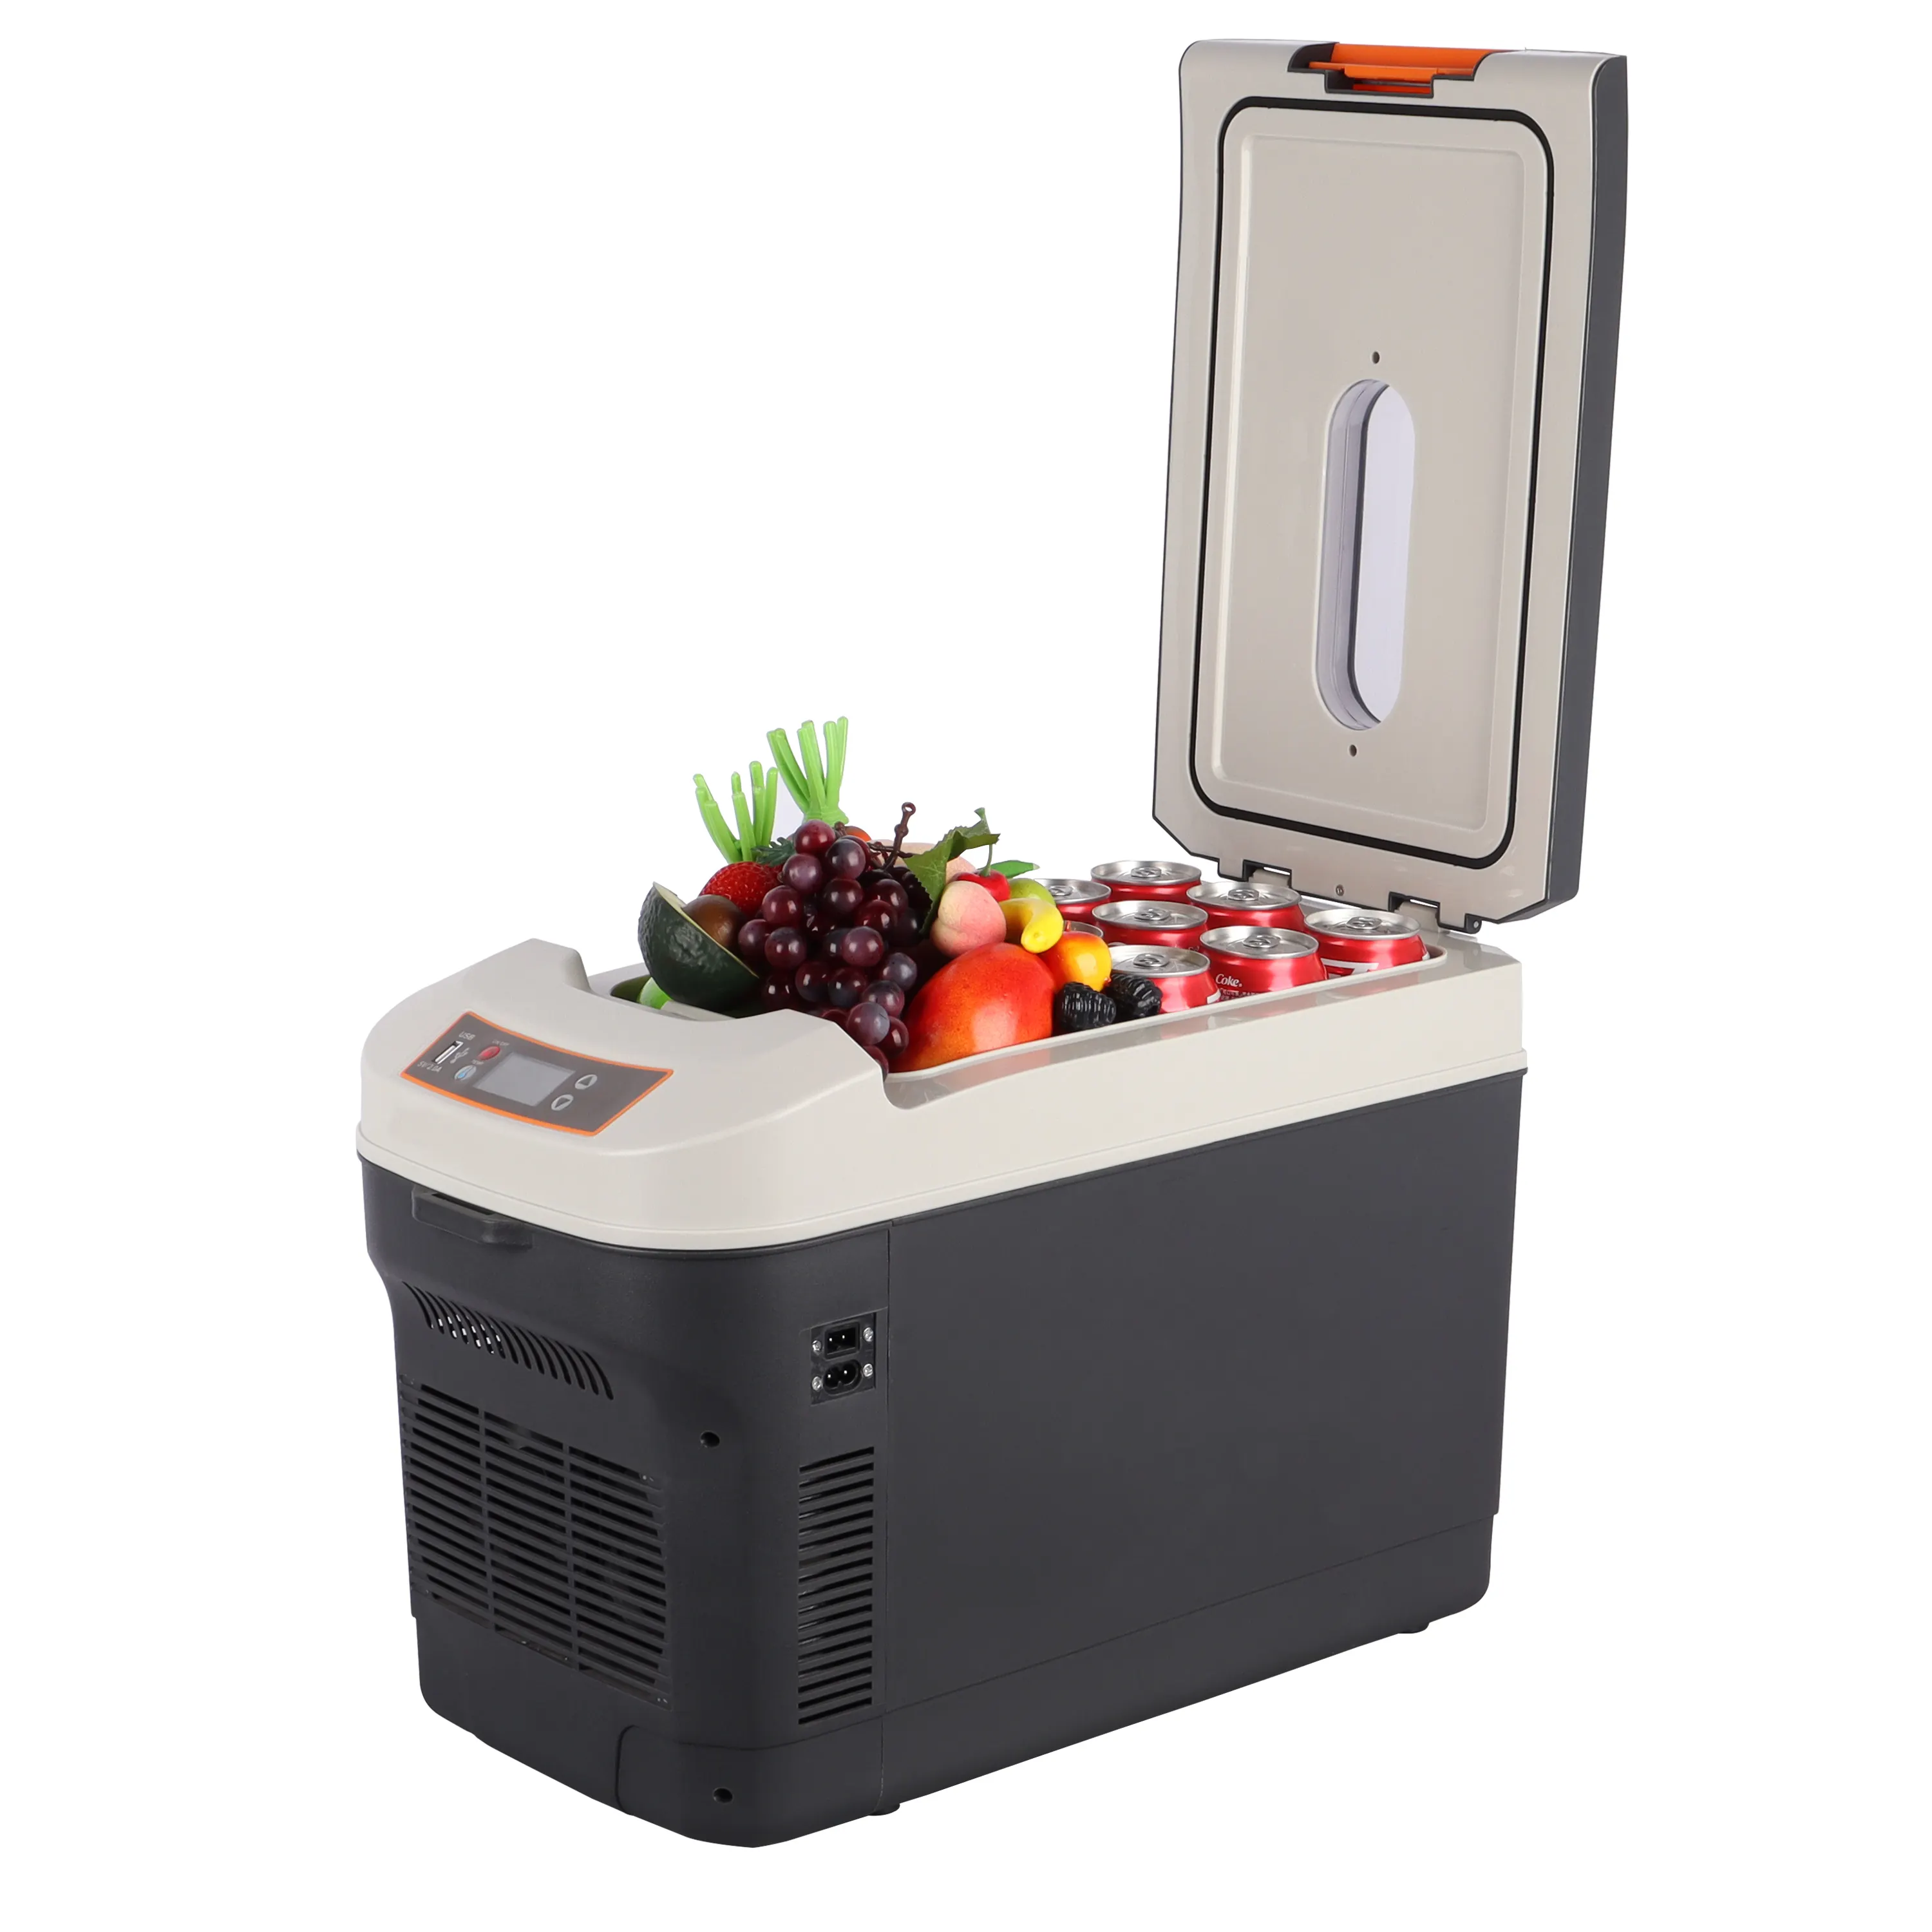 Camping portable cooler box coke cooler thermoelectric cooler and warmer box with belt and digital display 22L